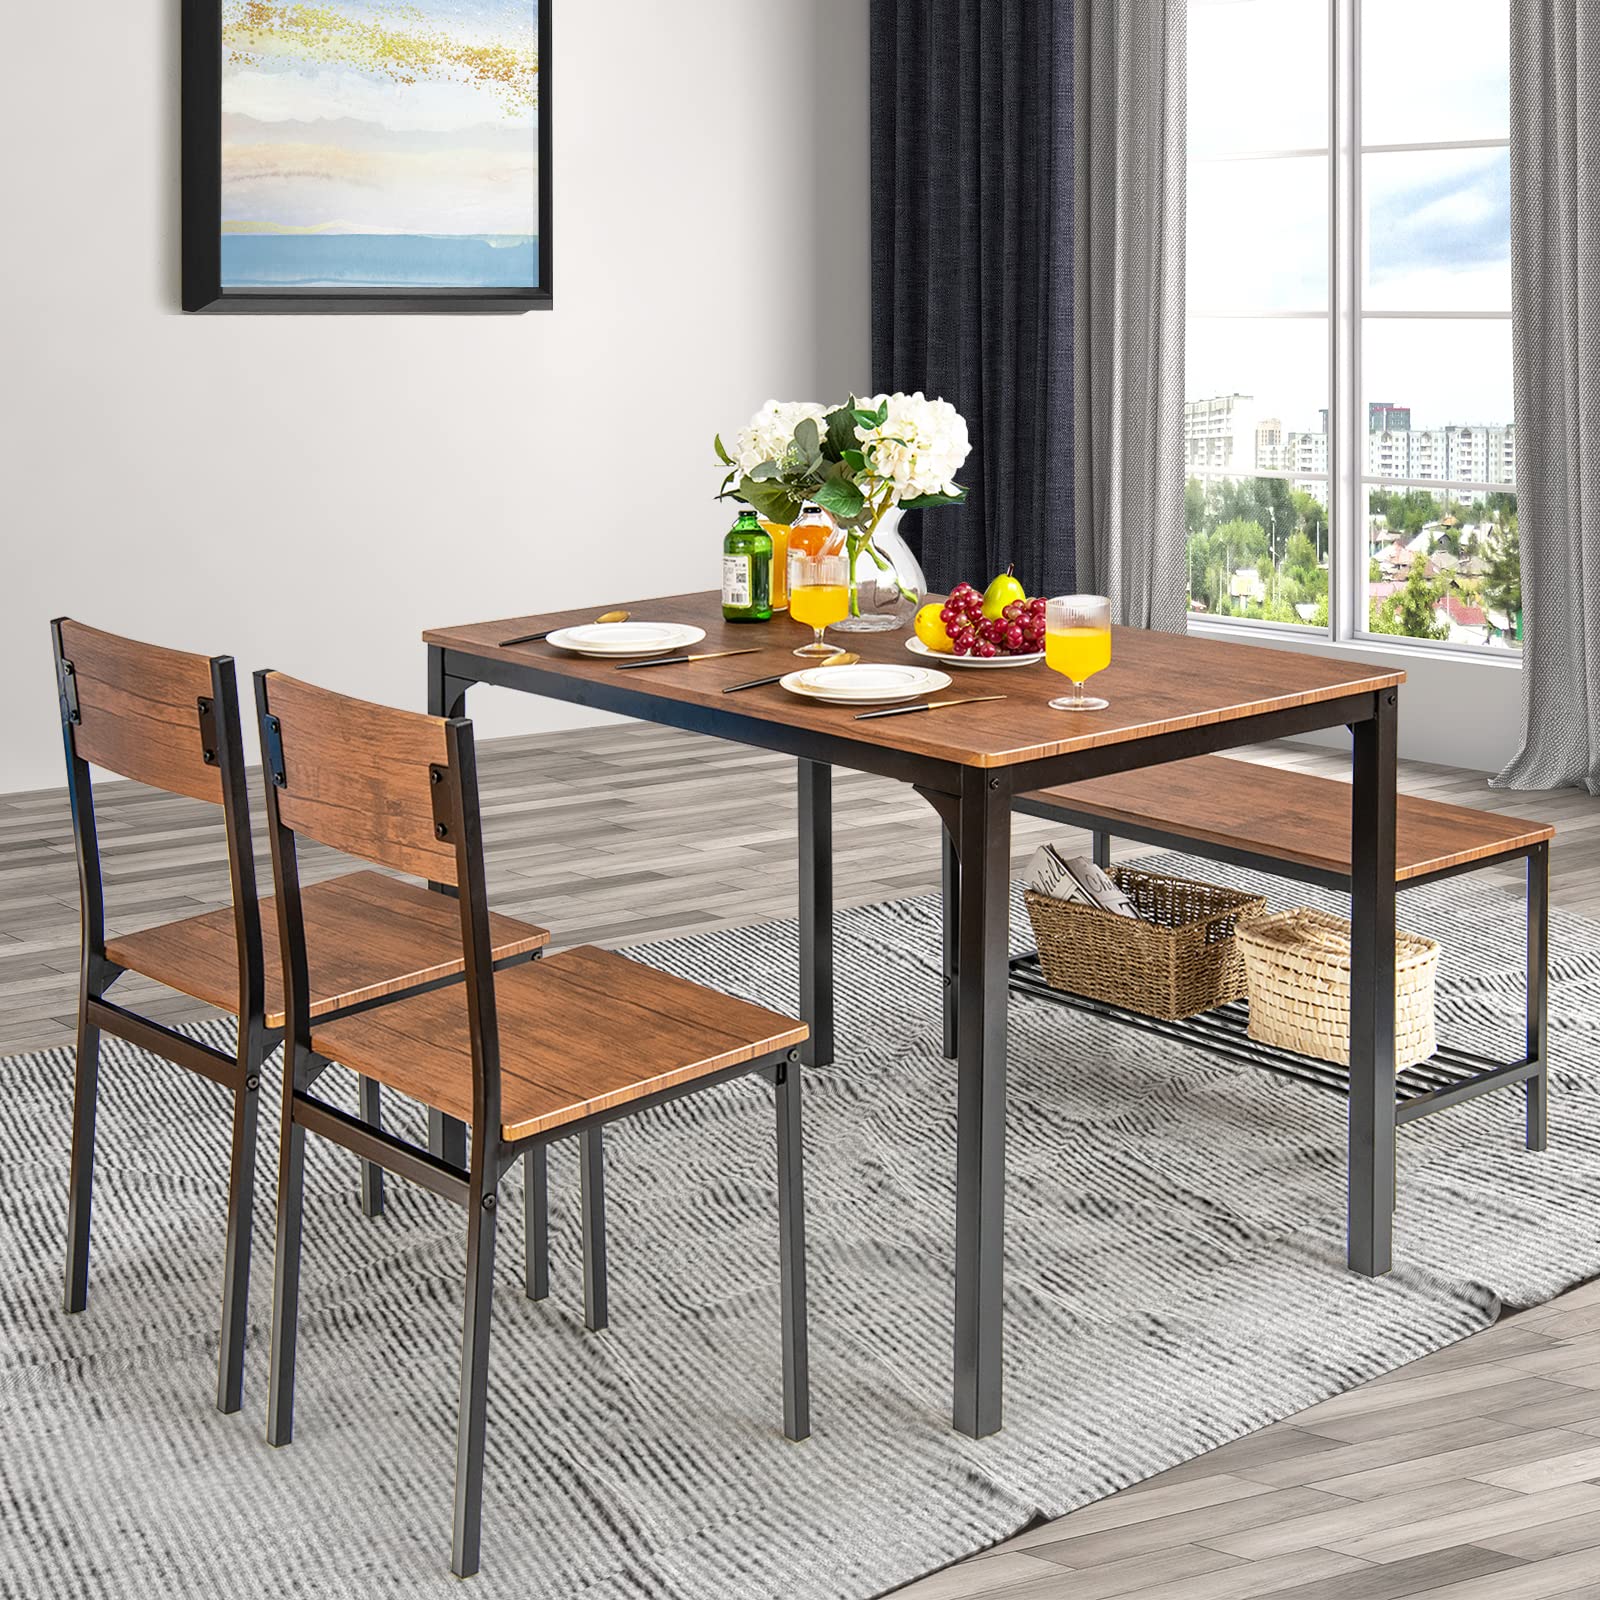 Tangkula 4-Piece Dining Table Set, Kitchen Table with Bench and Chairs